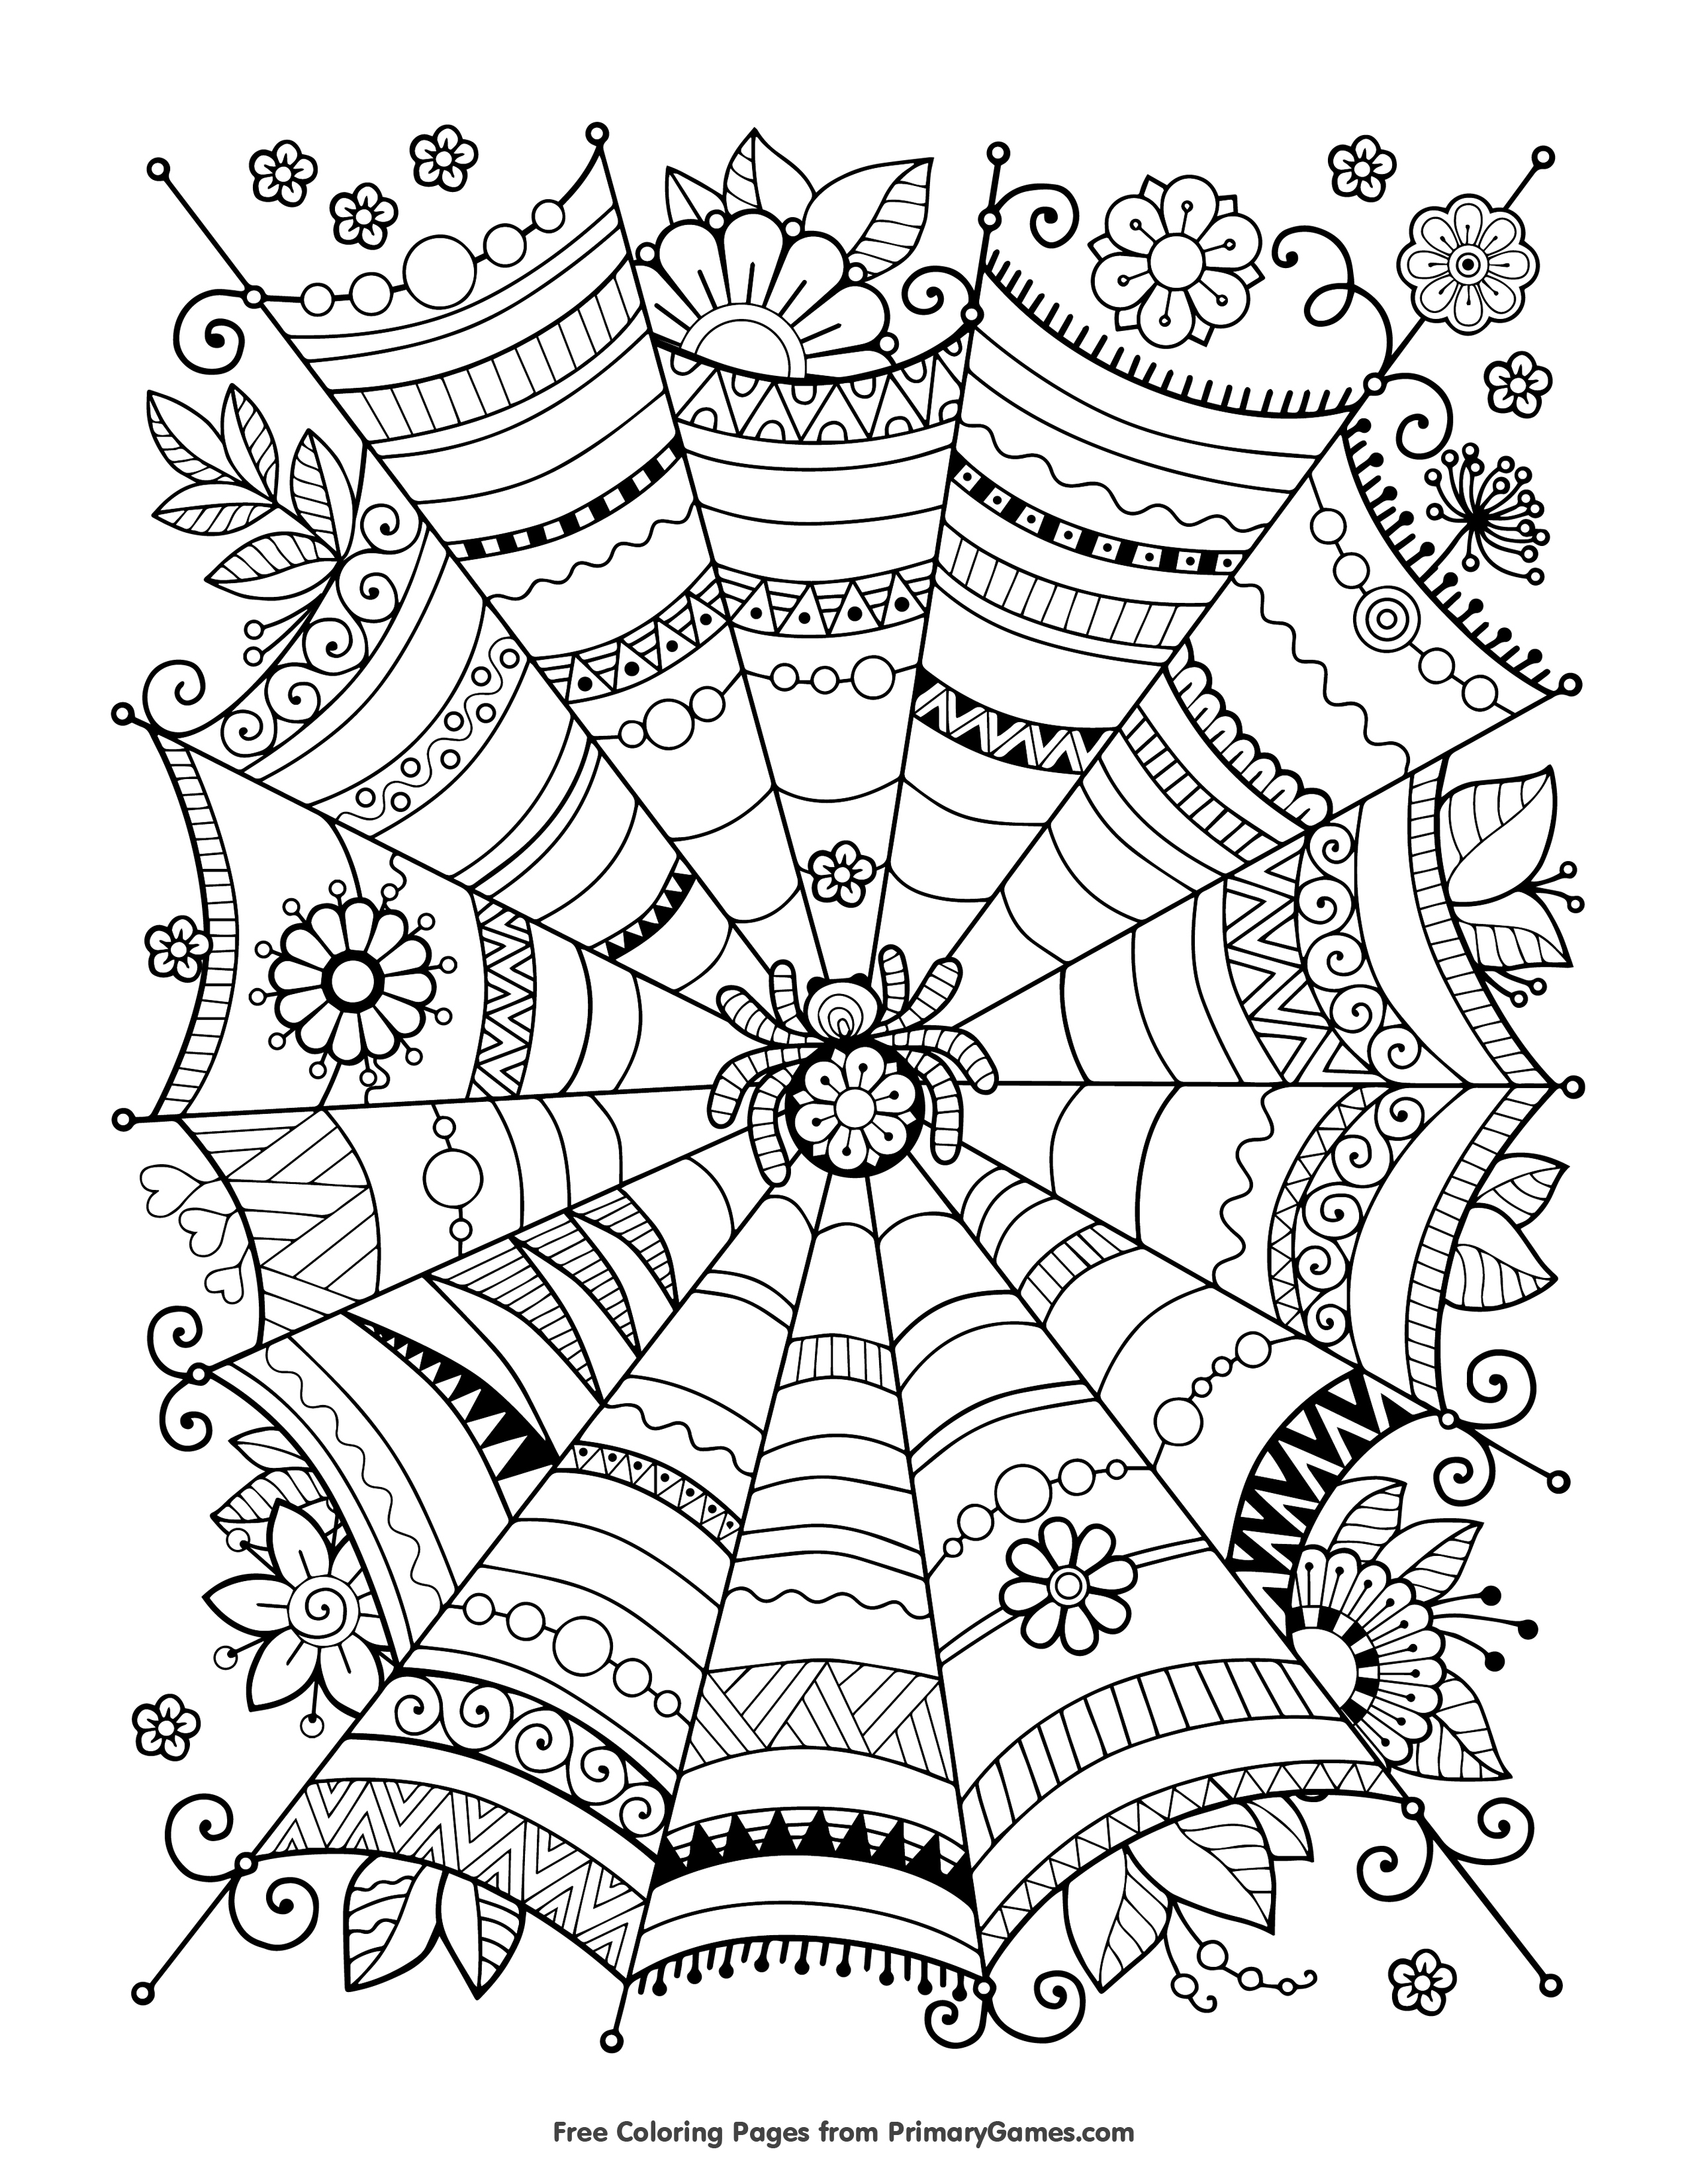 Coloring Pages Zen Coloring Pages Zentangle Spider Web Coloring Page Pages Summer For